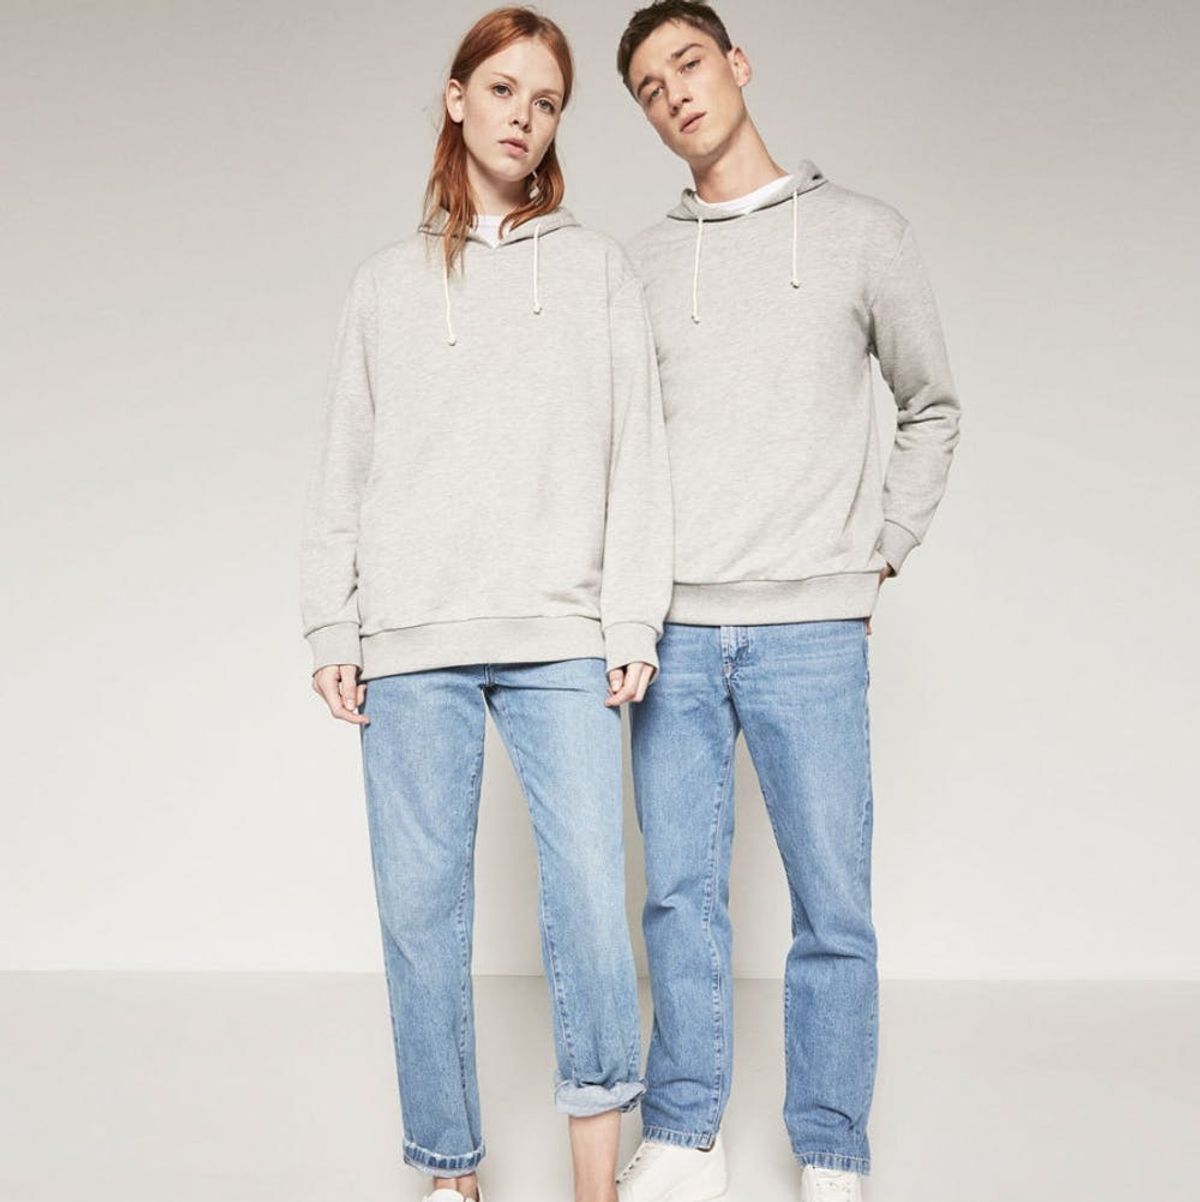 Why Zara’s New Gender-Neutral Clothing Collection Is Annoying the Internet